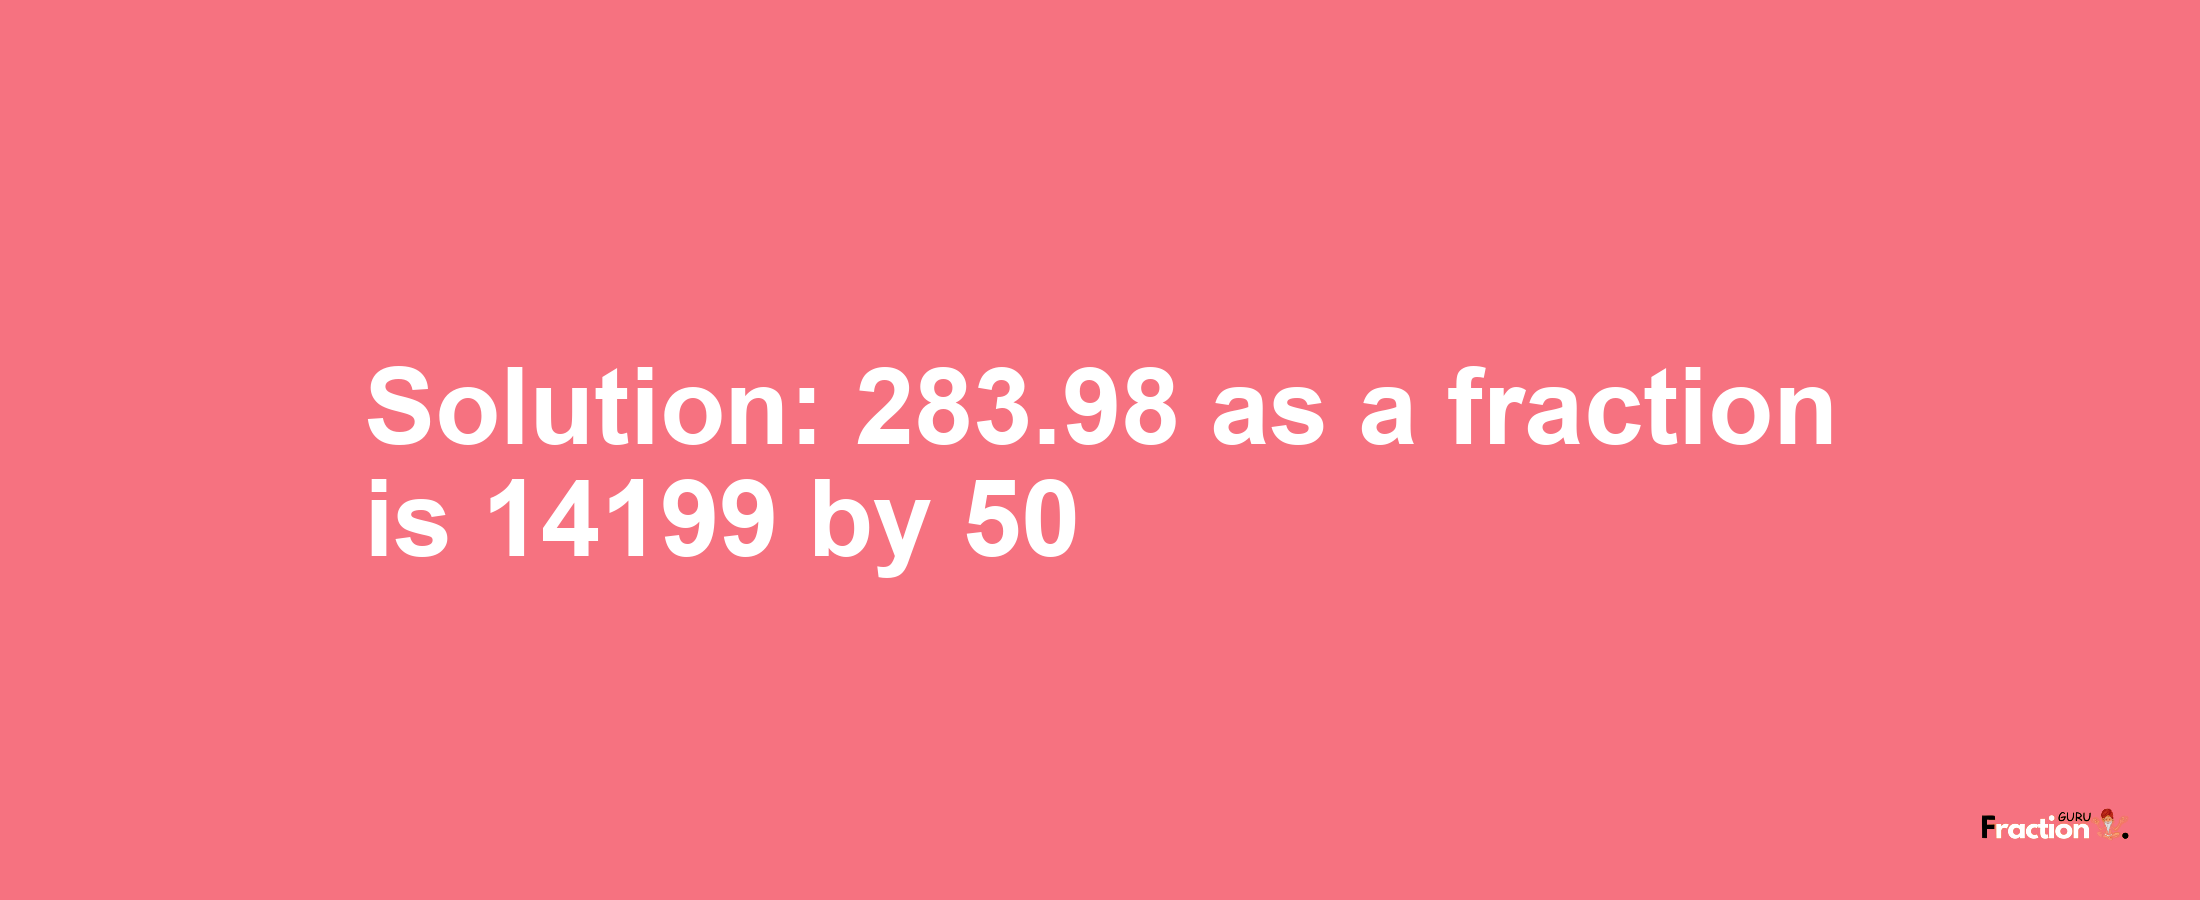 Solution:283.98 as a fraction is 14199/50